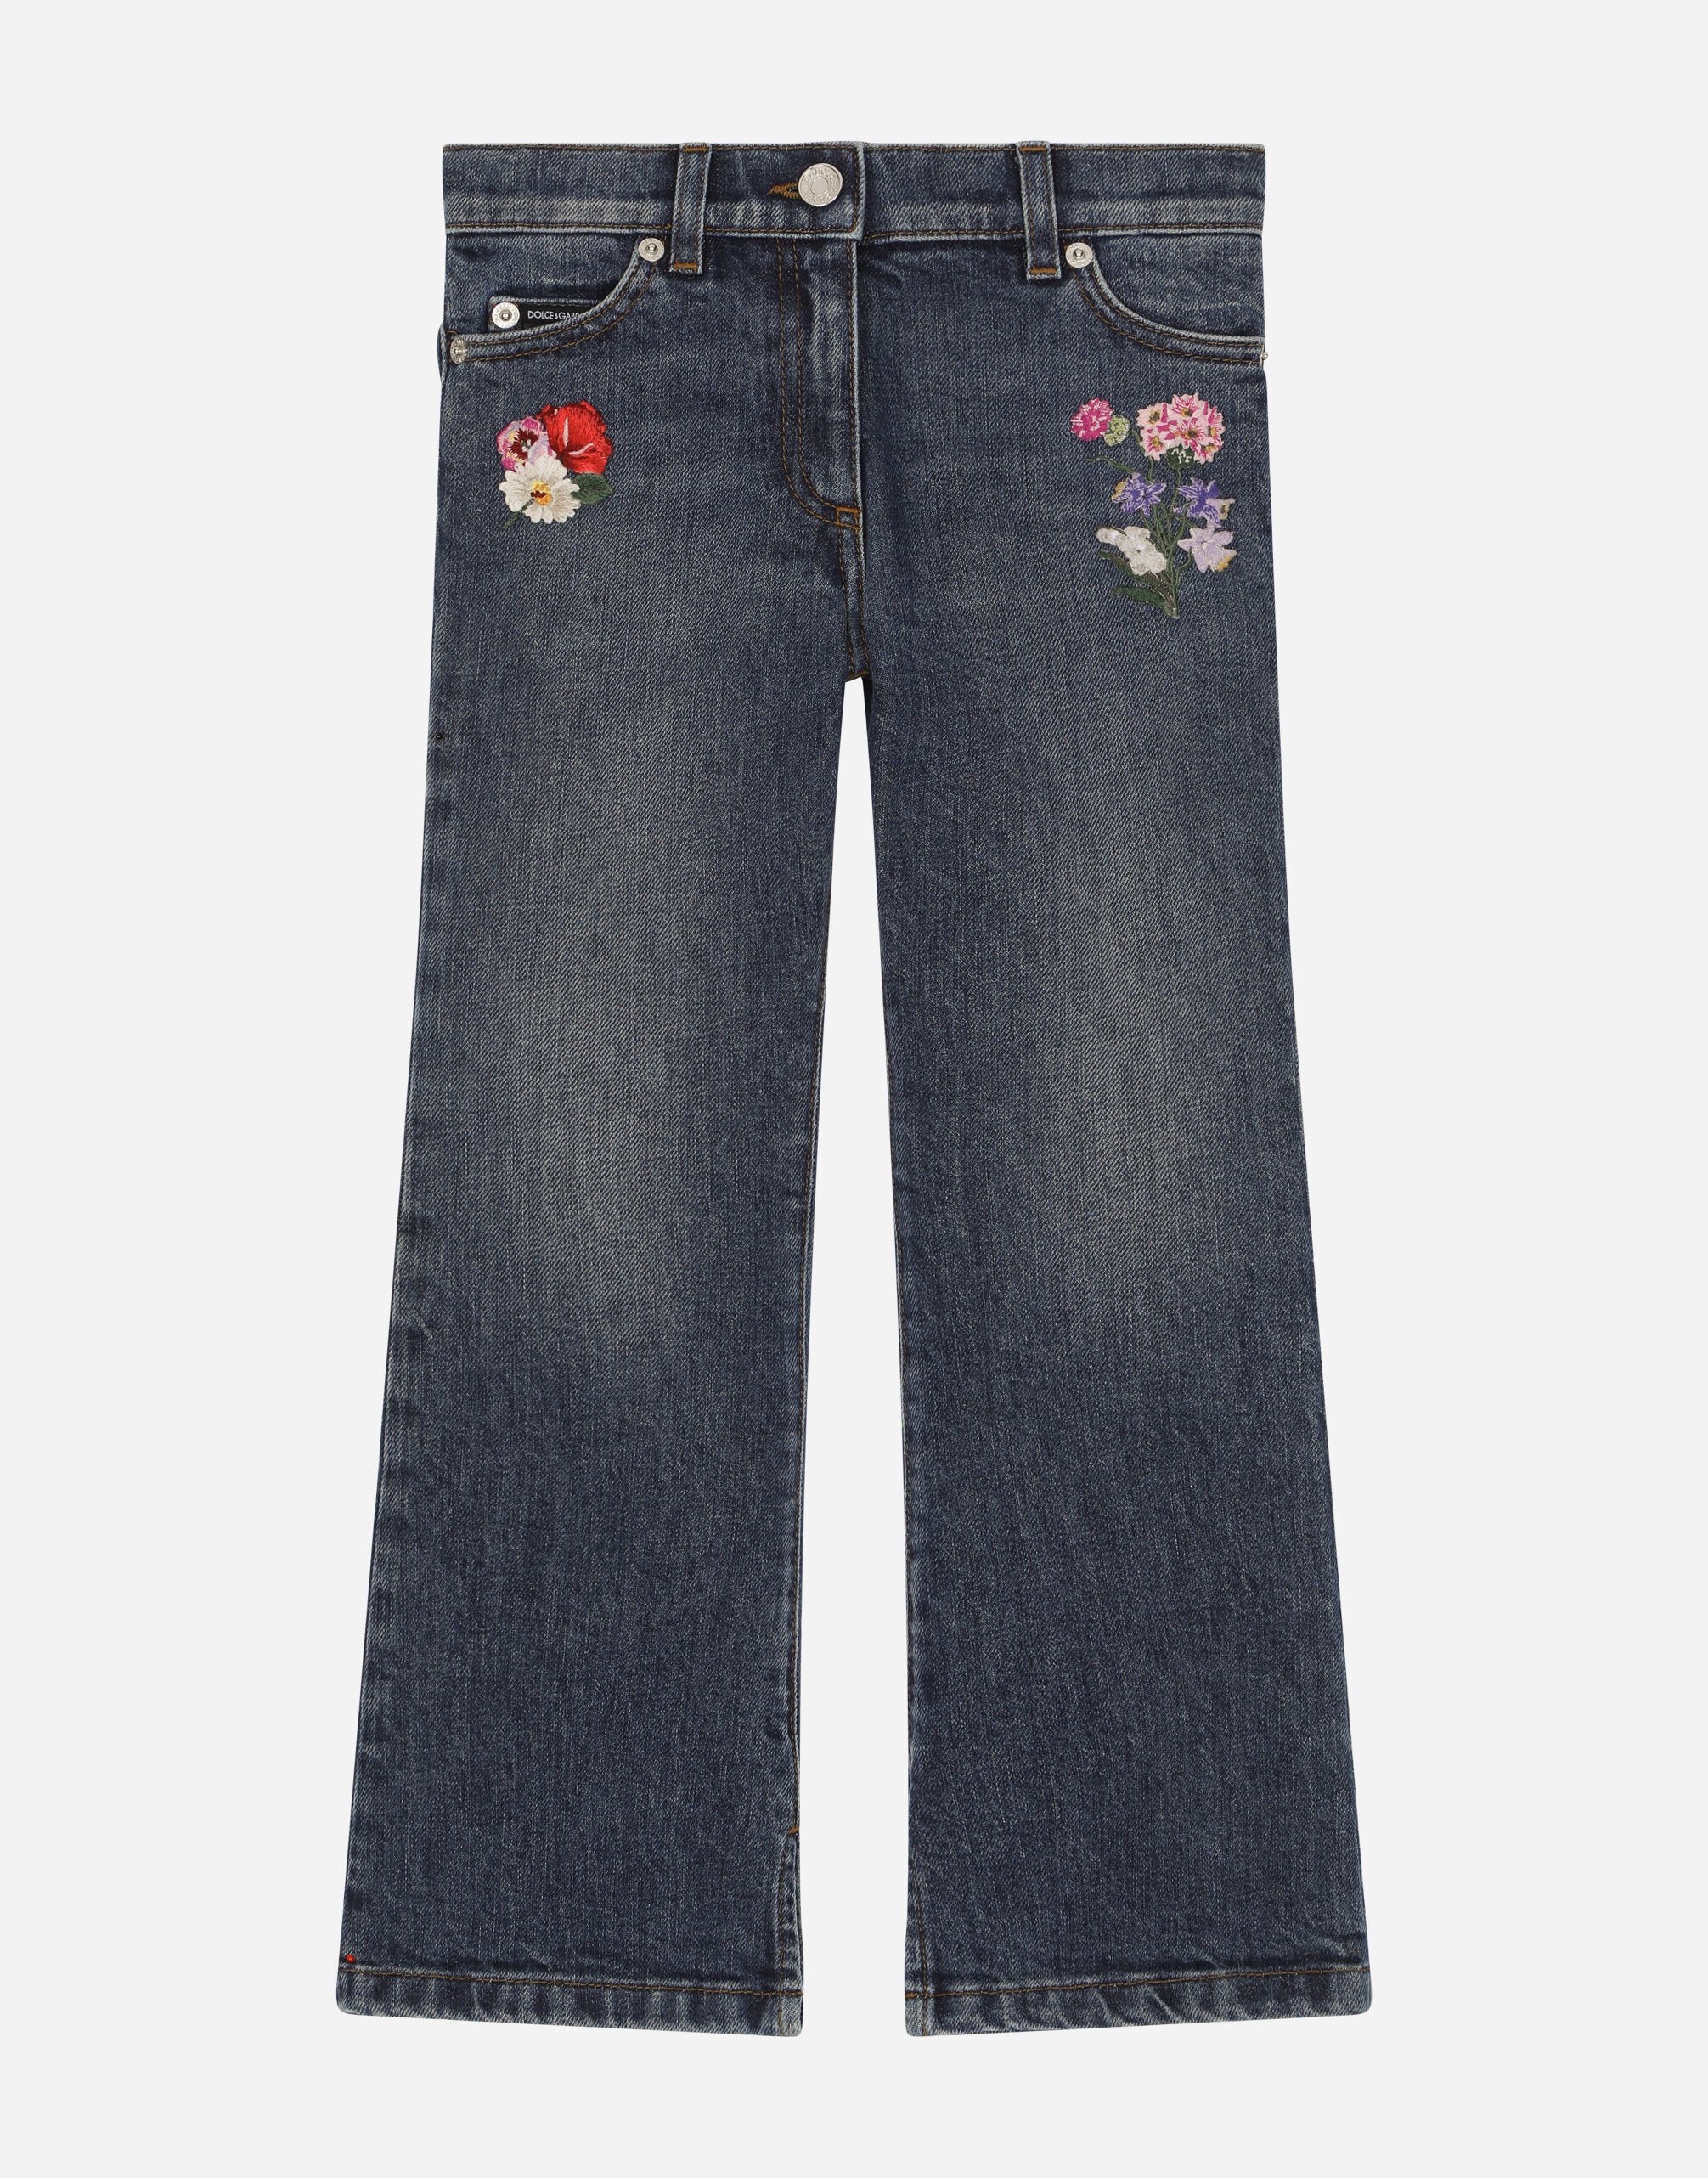 5-pocket denim pants with embroidery in Multicolor for